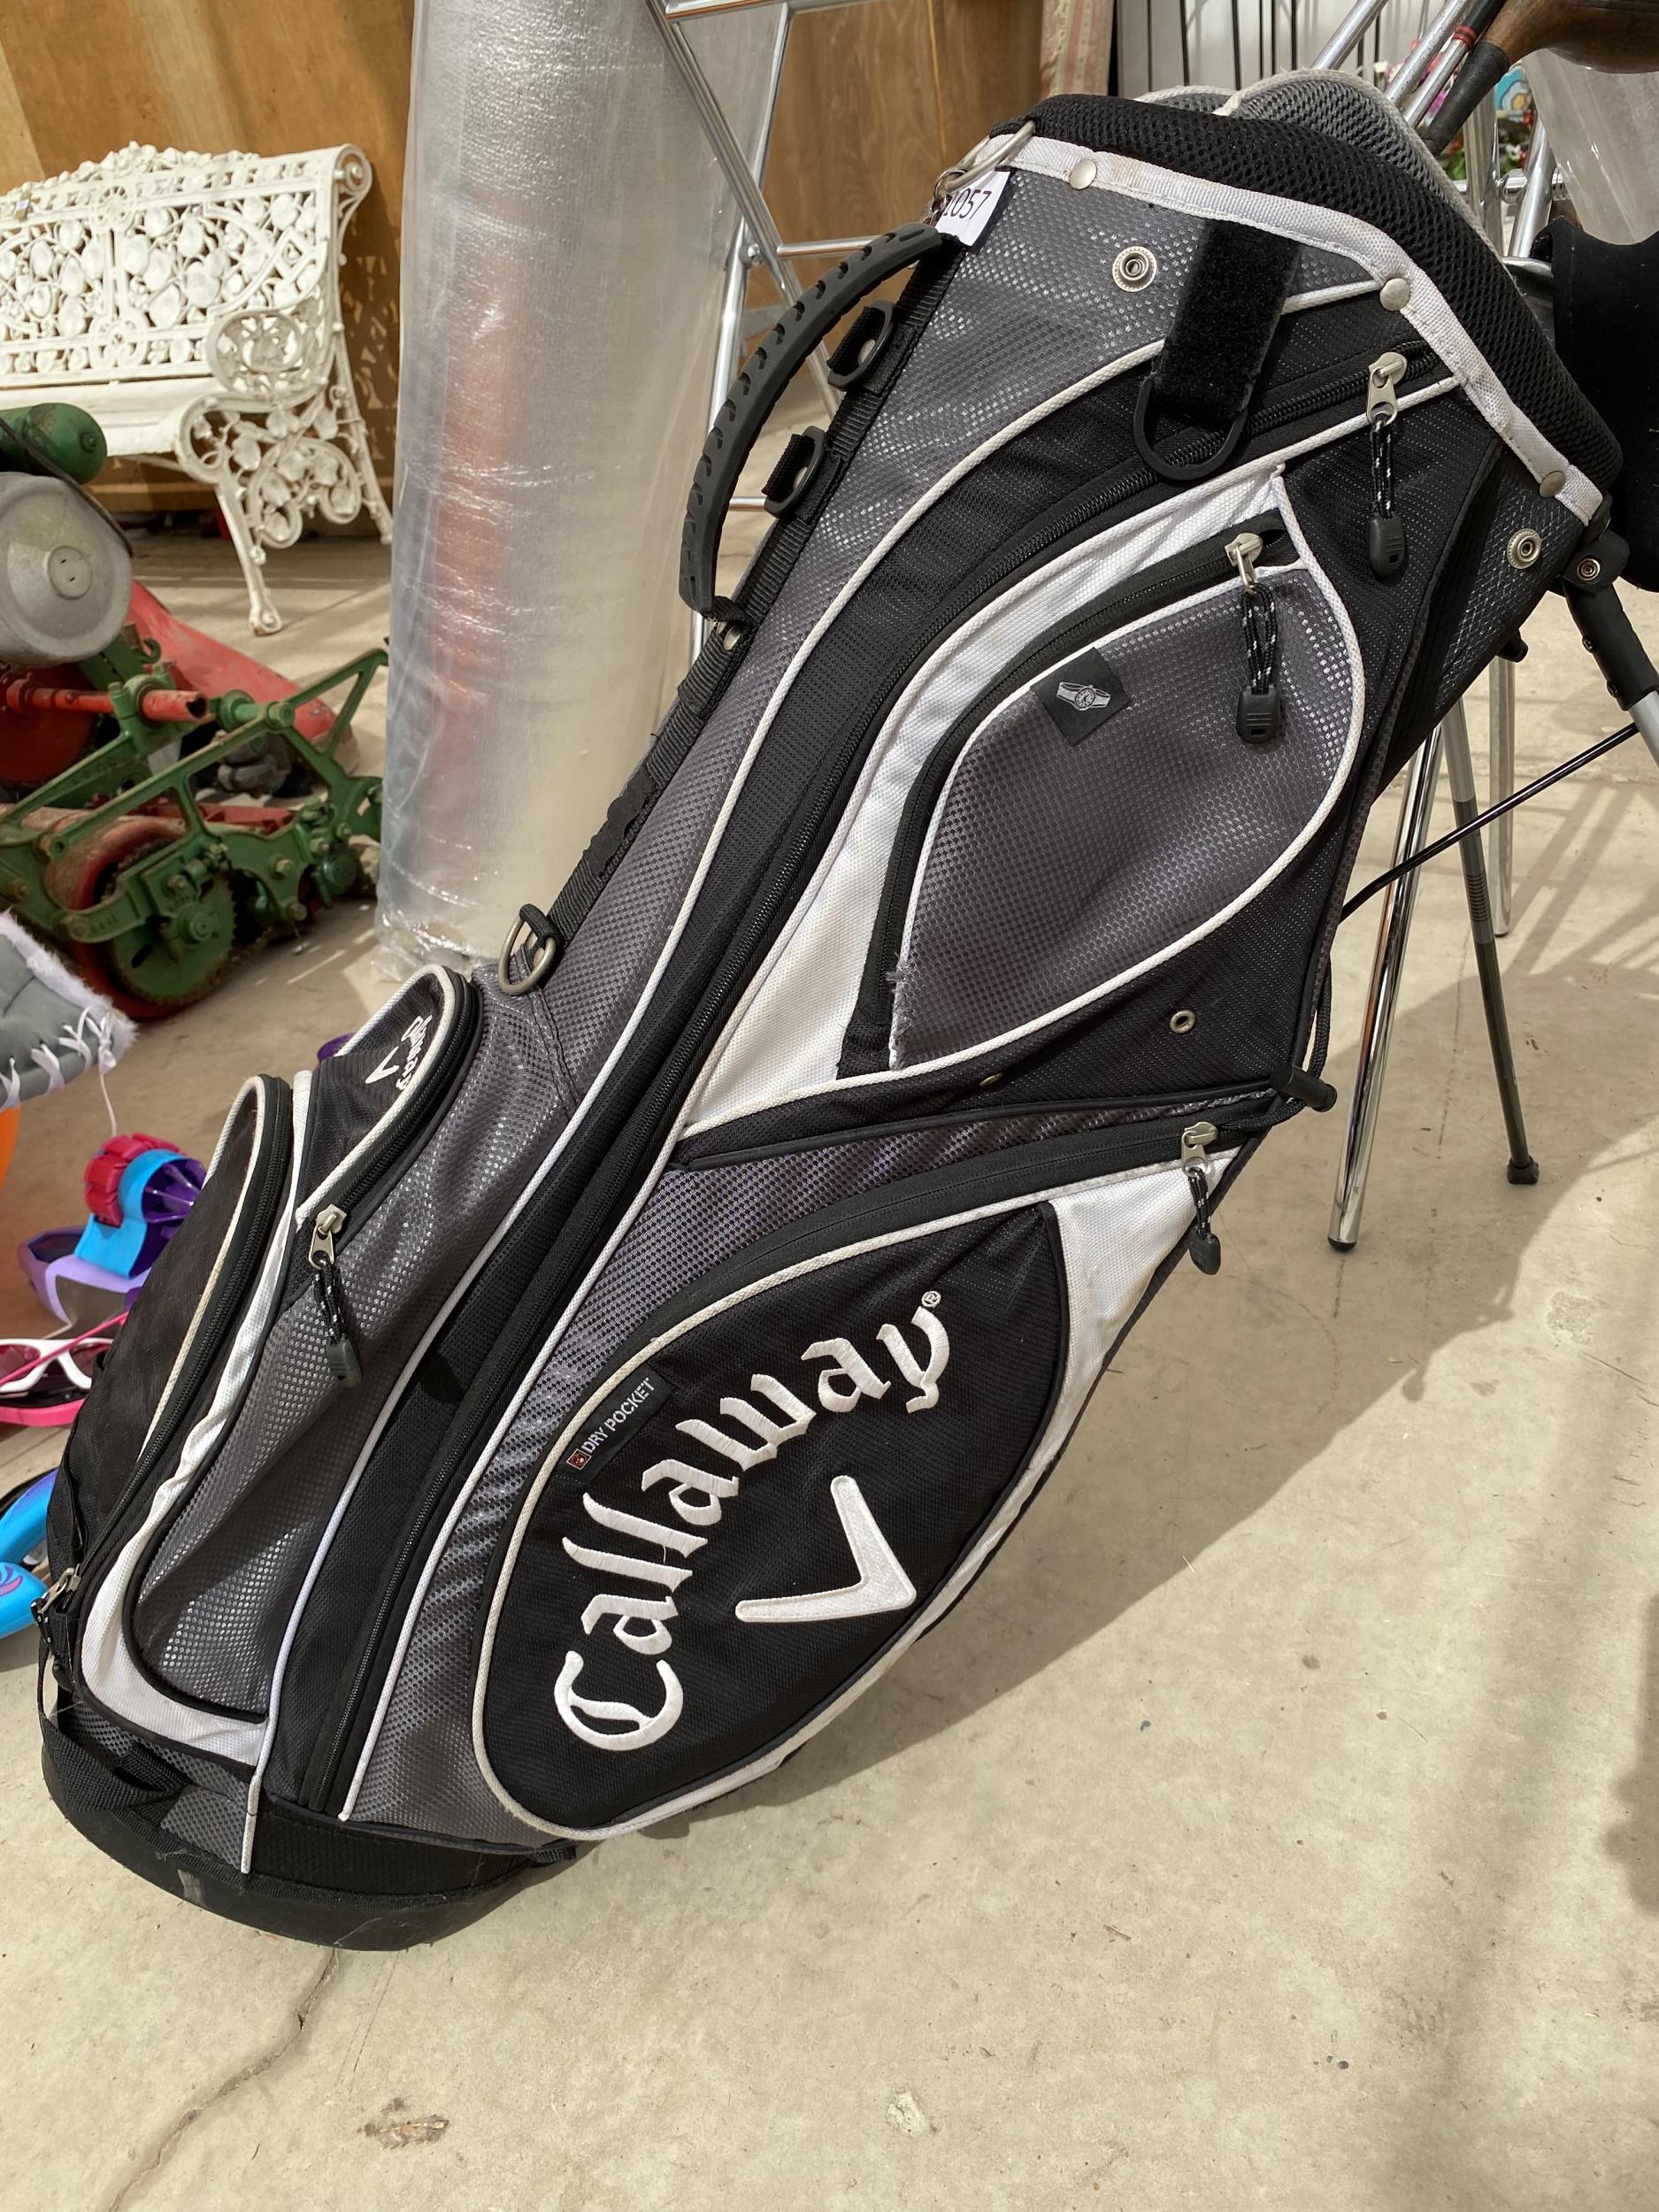 A CALLAWAY GOLF BAG WITH EIGHT VARIOUS GOLF CLUBS - Image 2 of 4